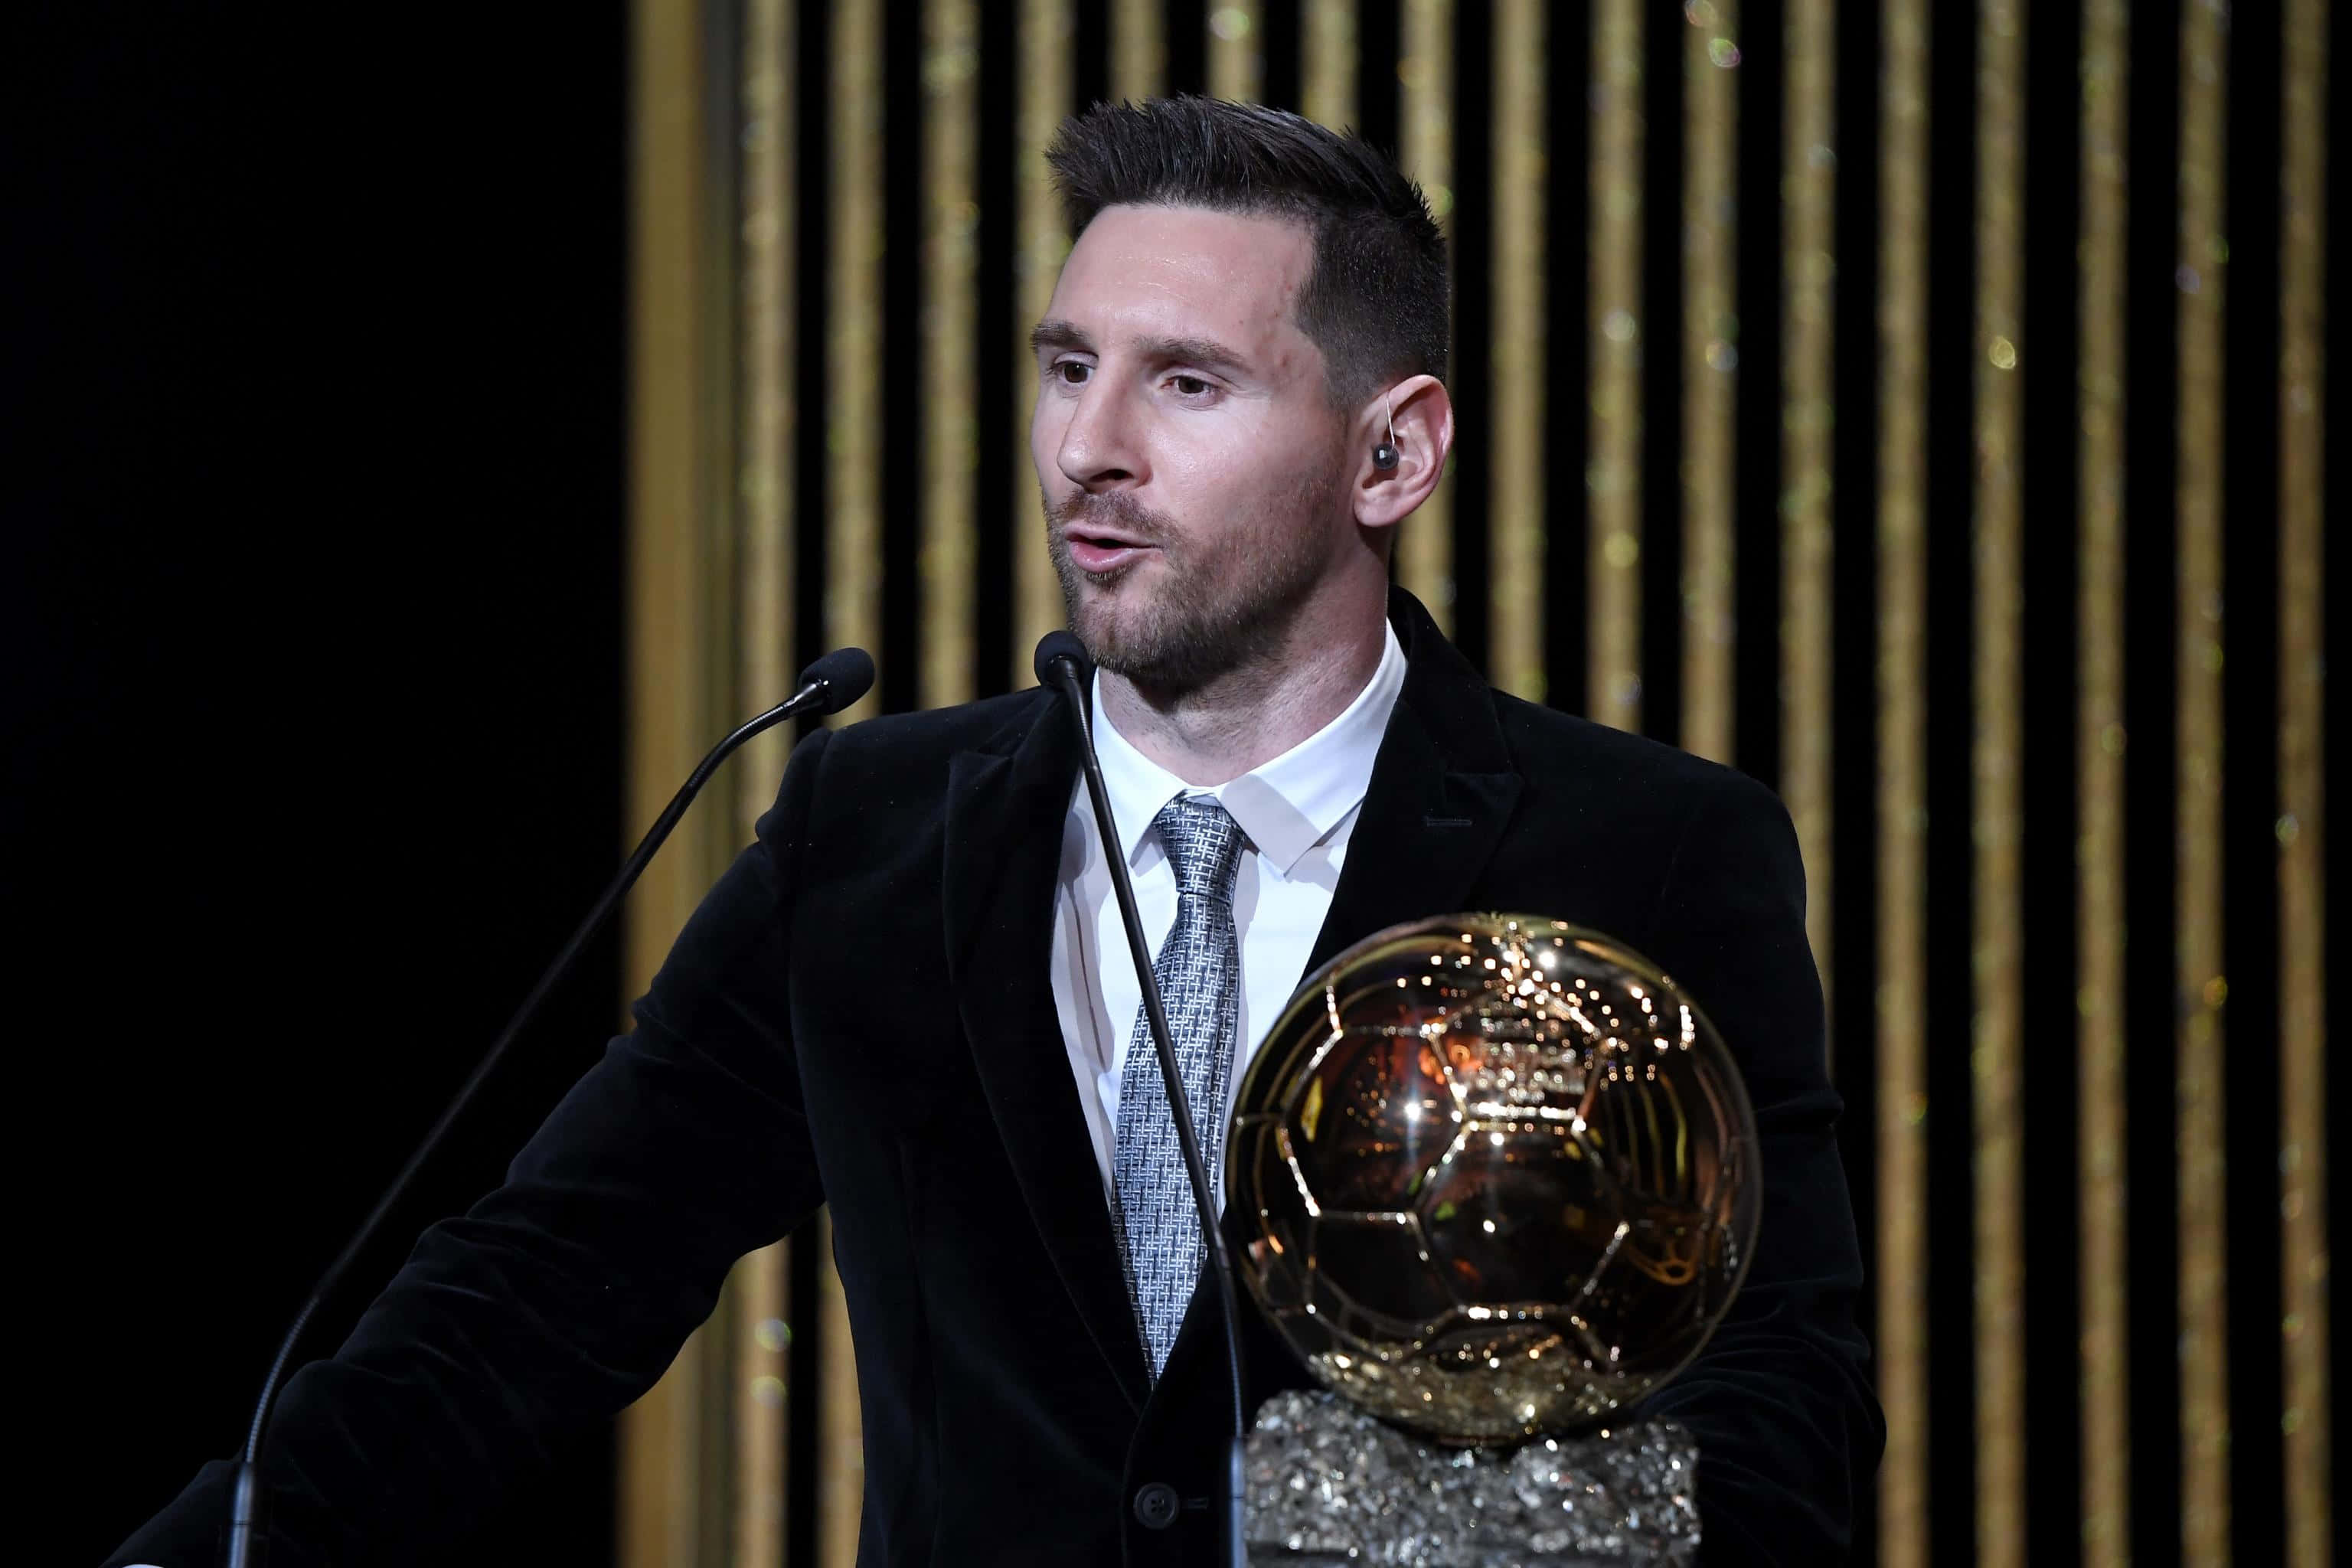 Caption: Lionel Messi With Ballon D'or Trophy, Proving His Excellence Once Again. Wallpaper